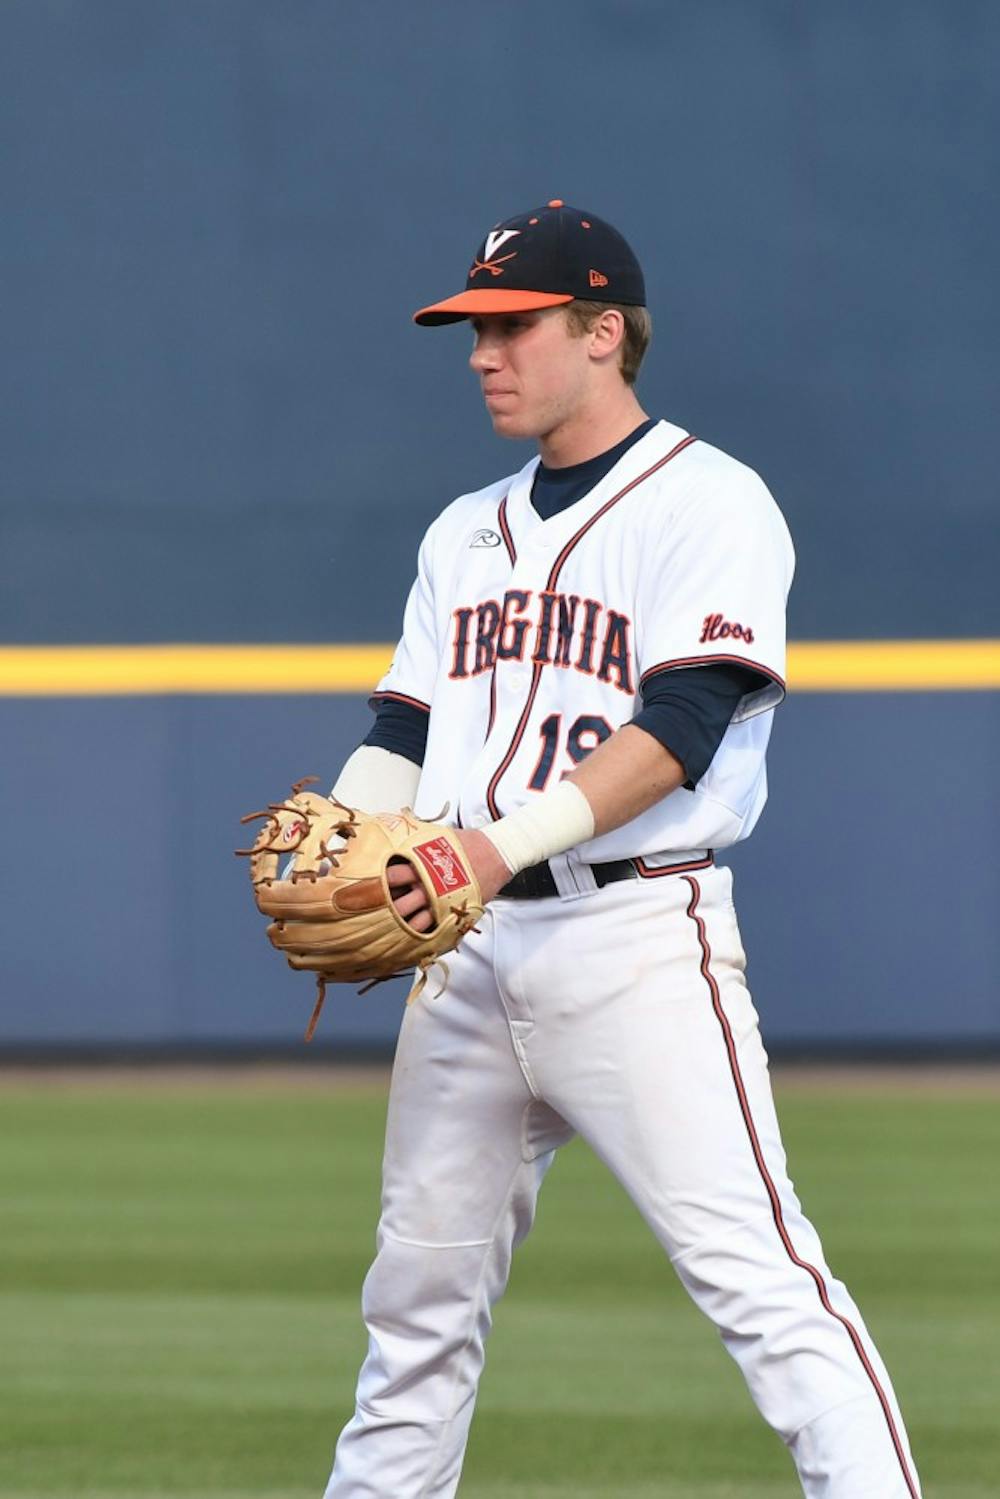 <p>Sophomore second baseman Andy Weber hit a RBI single in the eighth inning&nbsp;to give Virginia the lead over VCU.</p>